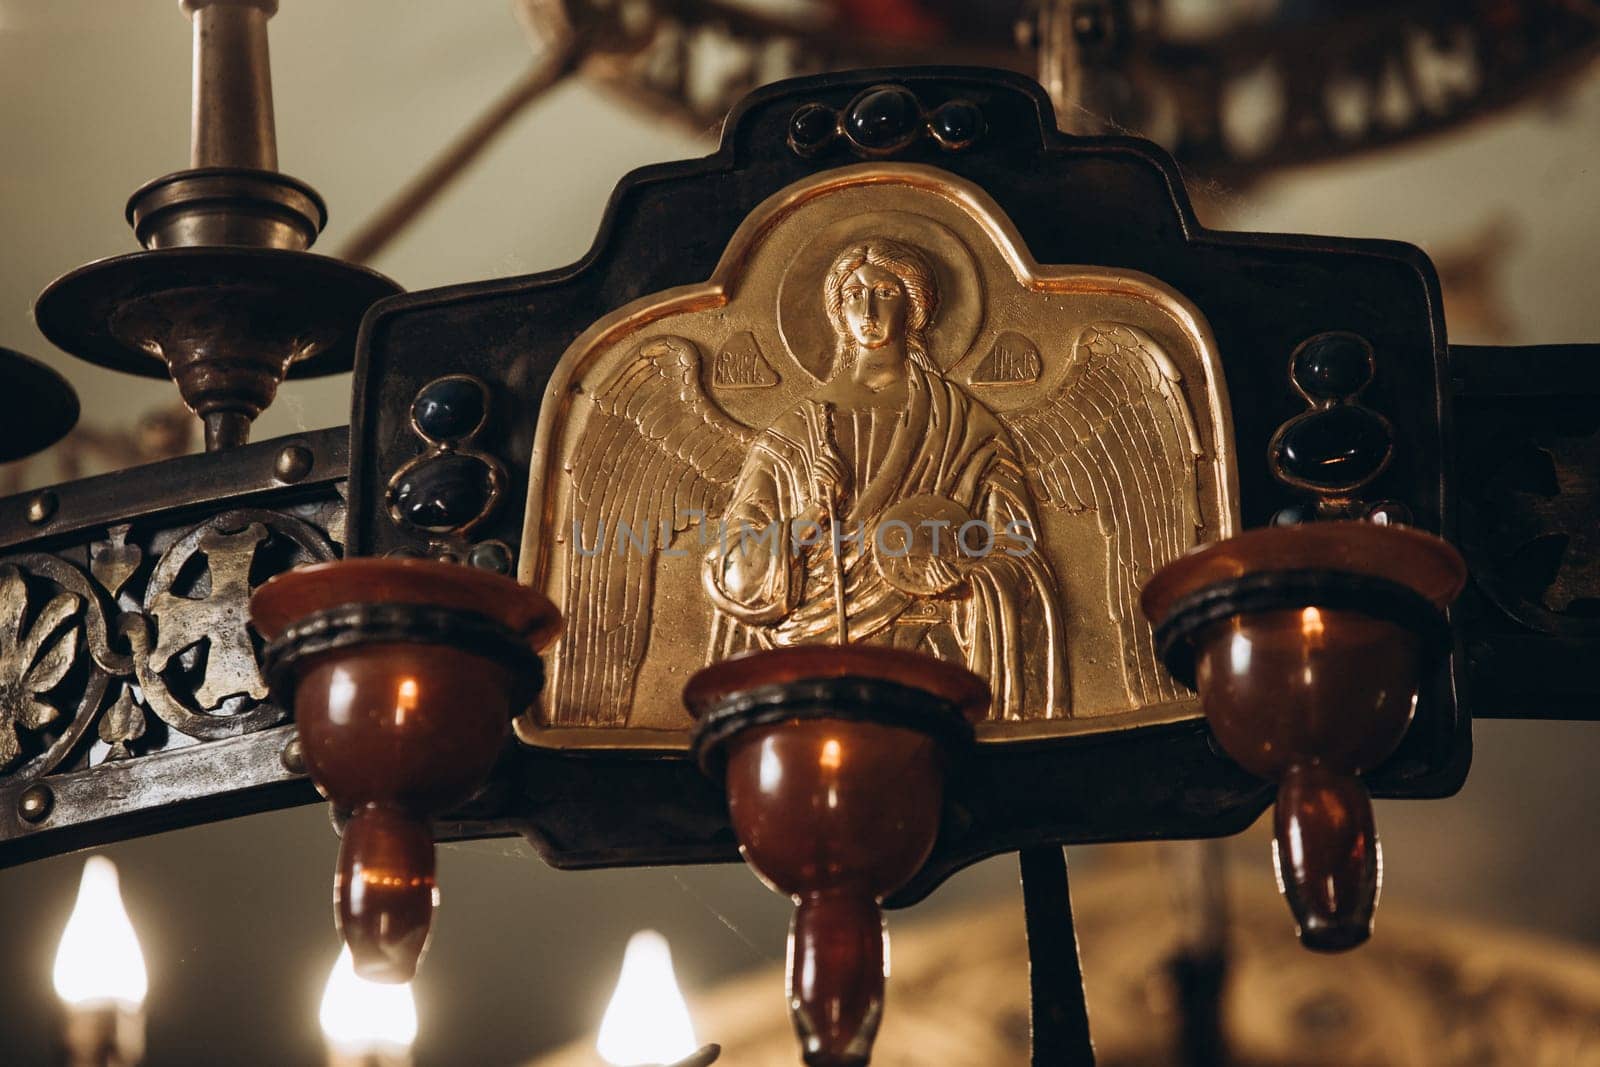 the icon lamp in the church hangs near the icon. High quality photo